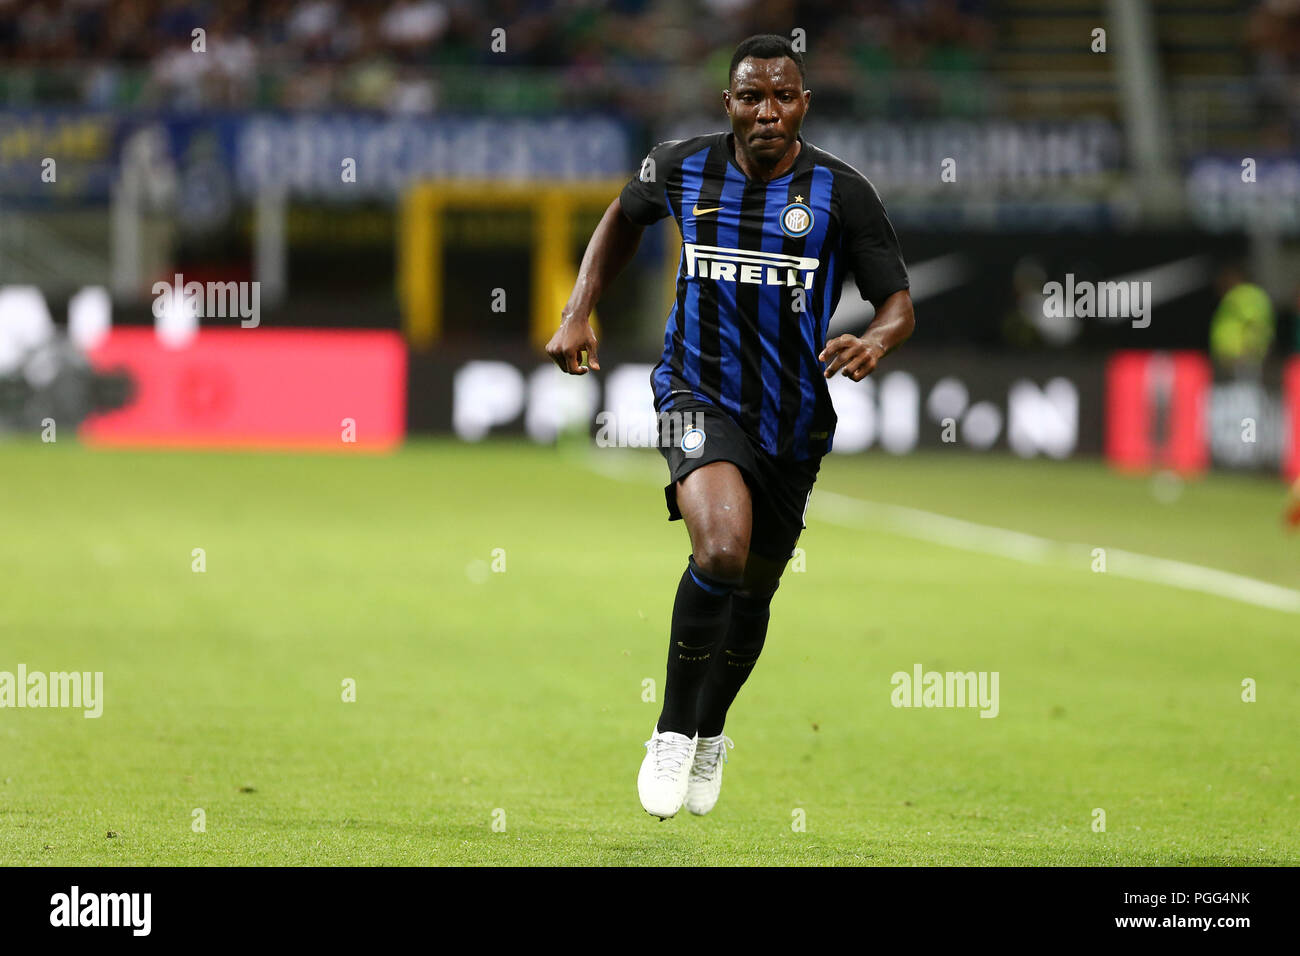 Milano, Italy. 26th August, 2018.  Kwadwo Asamoah of FC Internazionale in action during the Serie A match between FC Internazionale and Torino Fc. Credit: Marco Canoniero/Alamy Live News Stock Photo